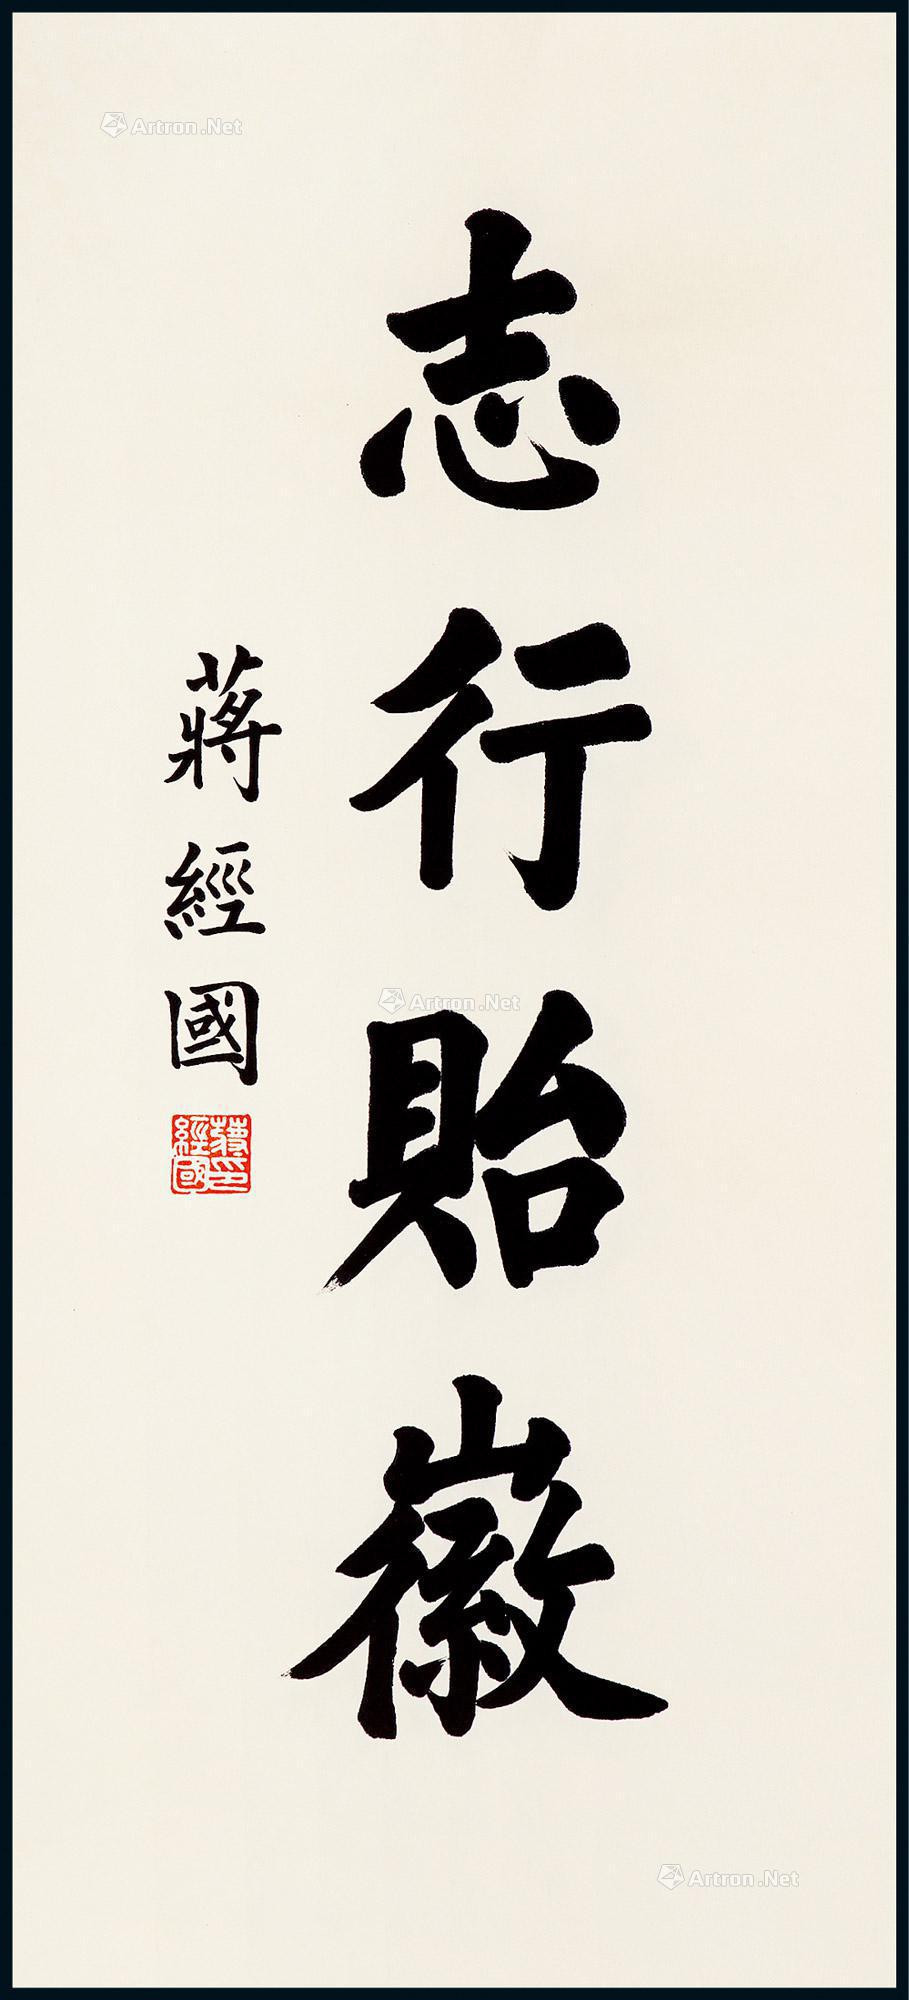 Calligraphy by Chiang ching-kuo